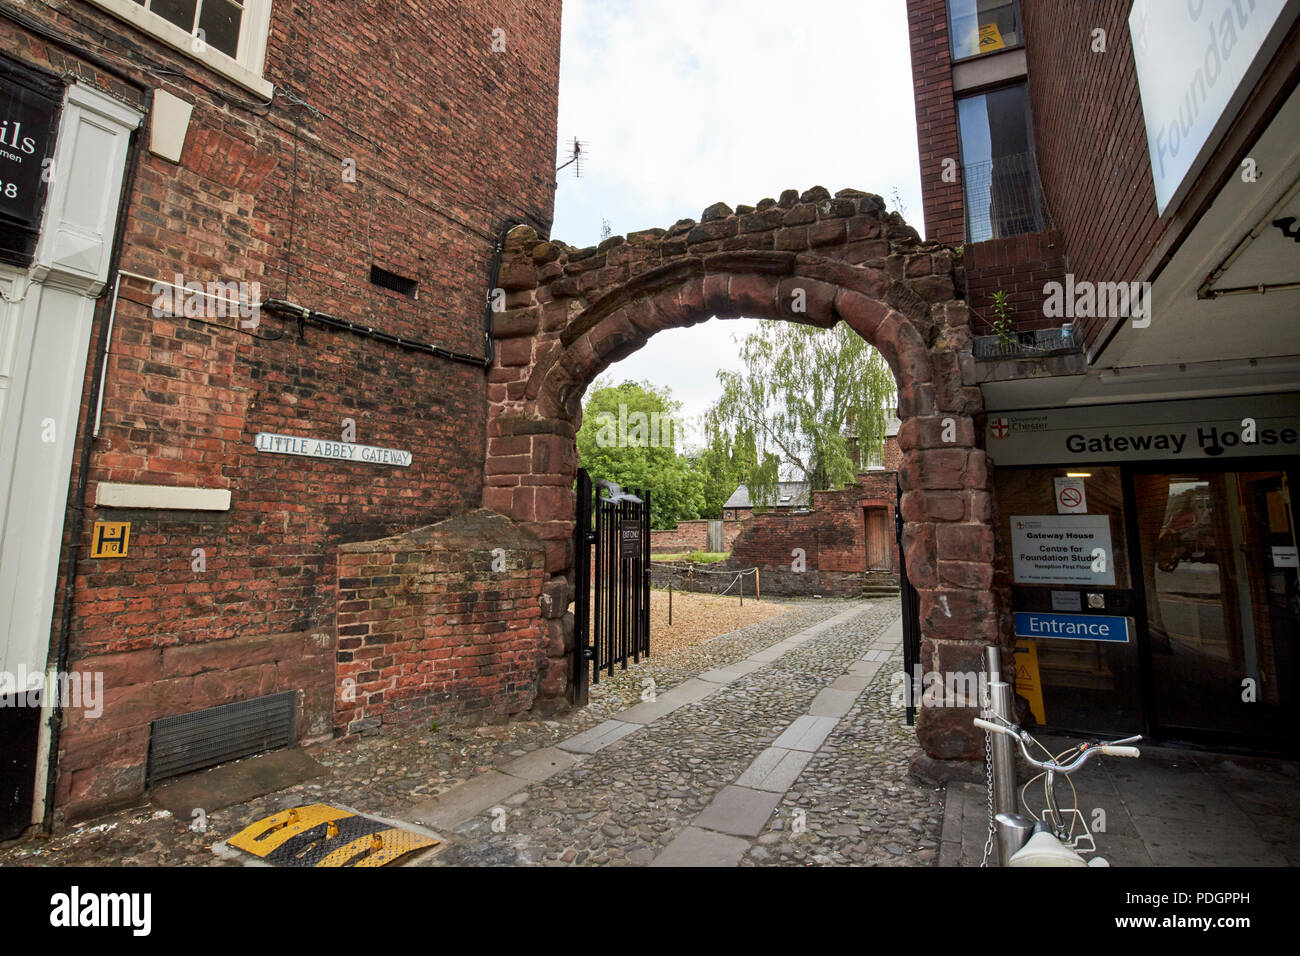 little abbey gateway archway entrance to the abbey chester cheshire england uk Stock Photo